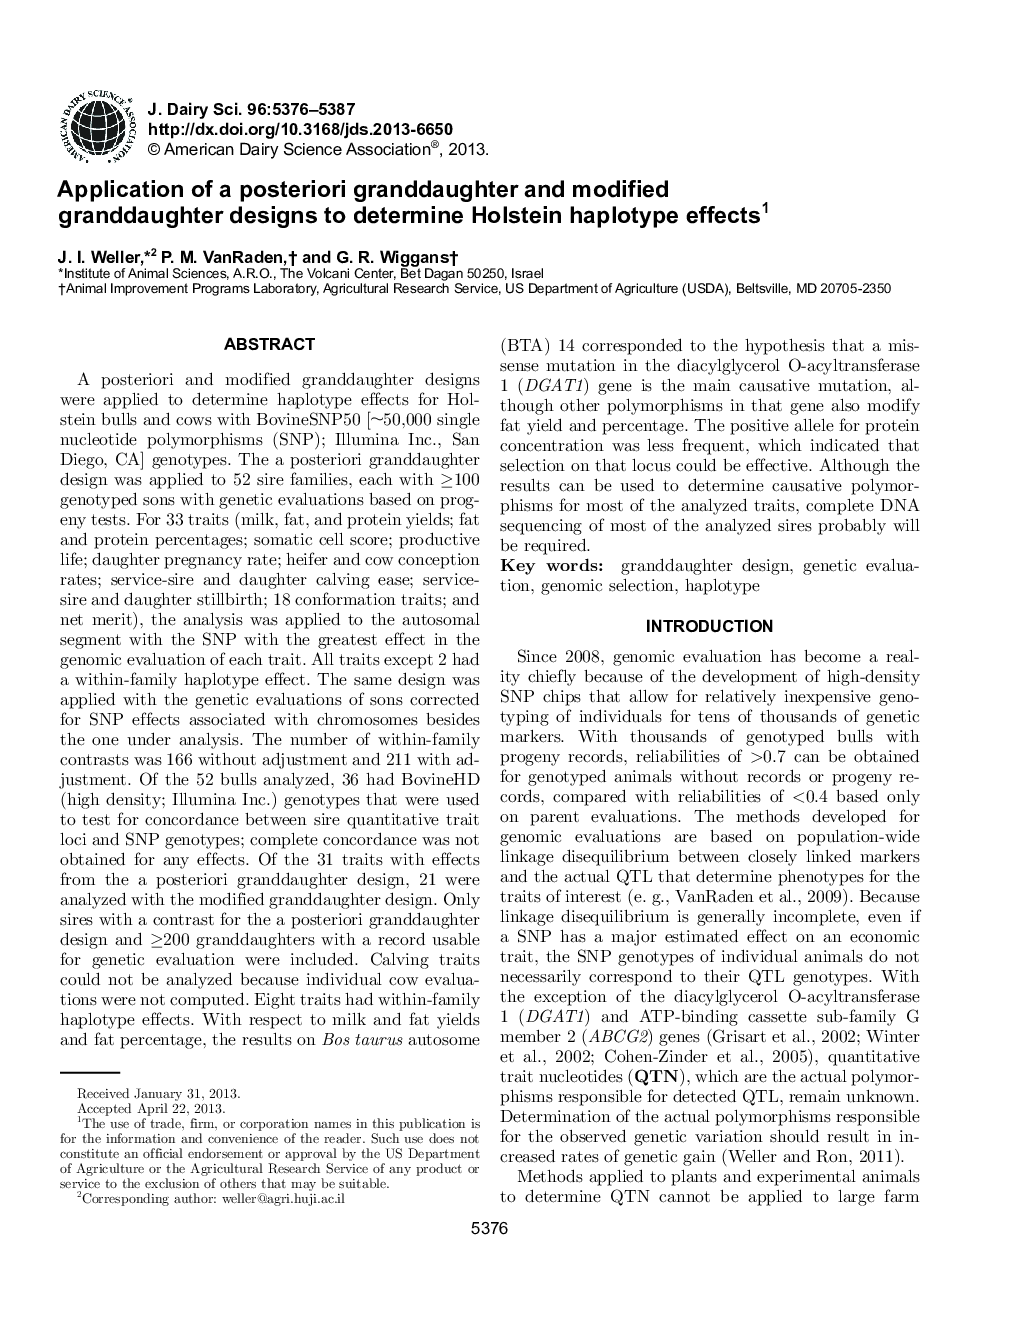 Application of a posteriori granddaughter and modified granddaughter designs to determine Holstein haplotype effects 1